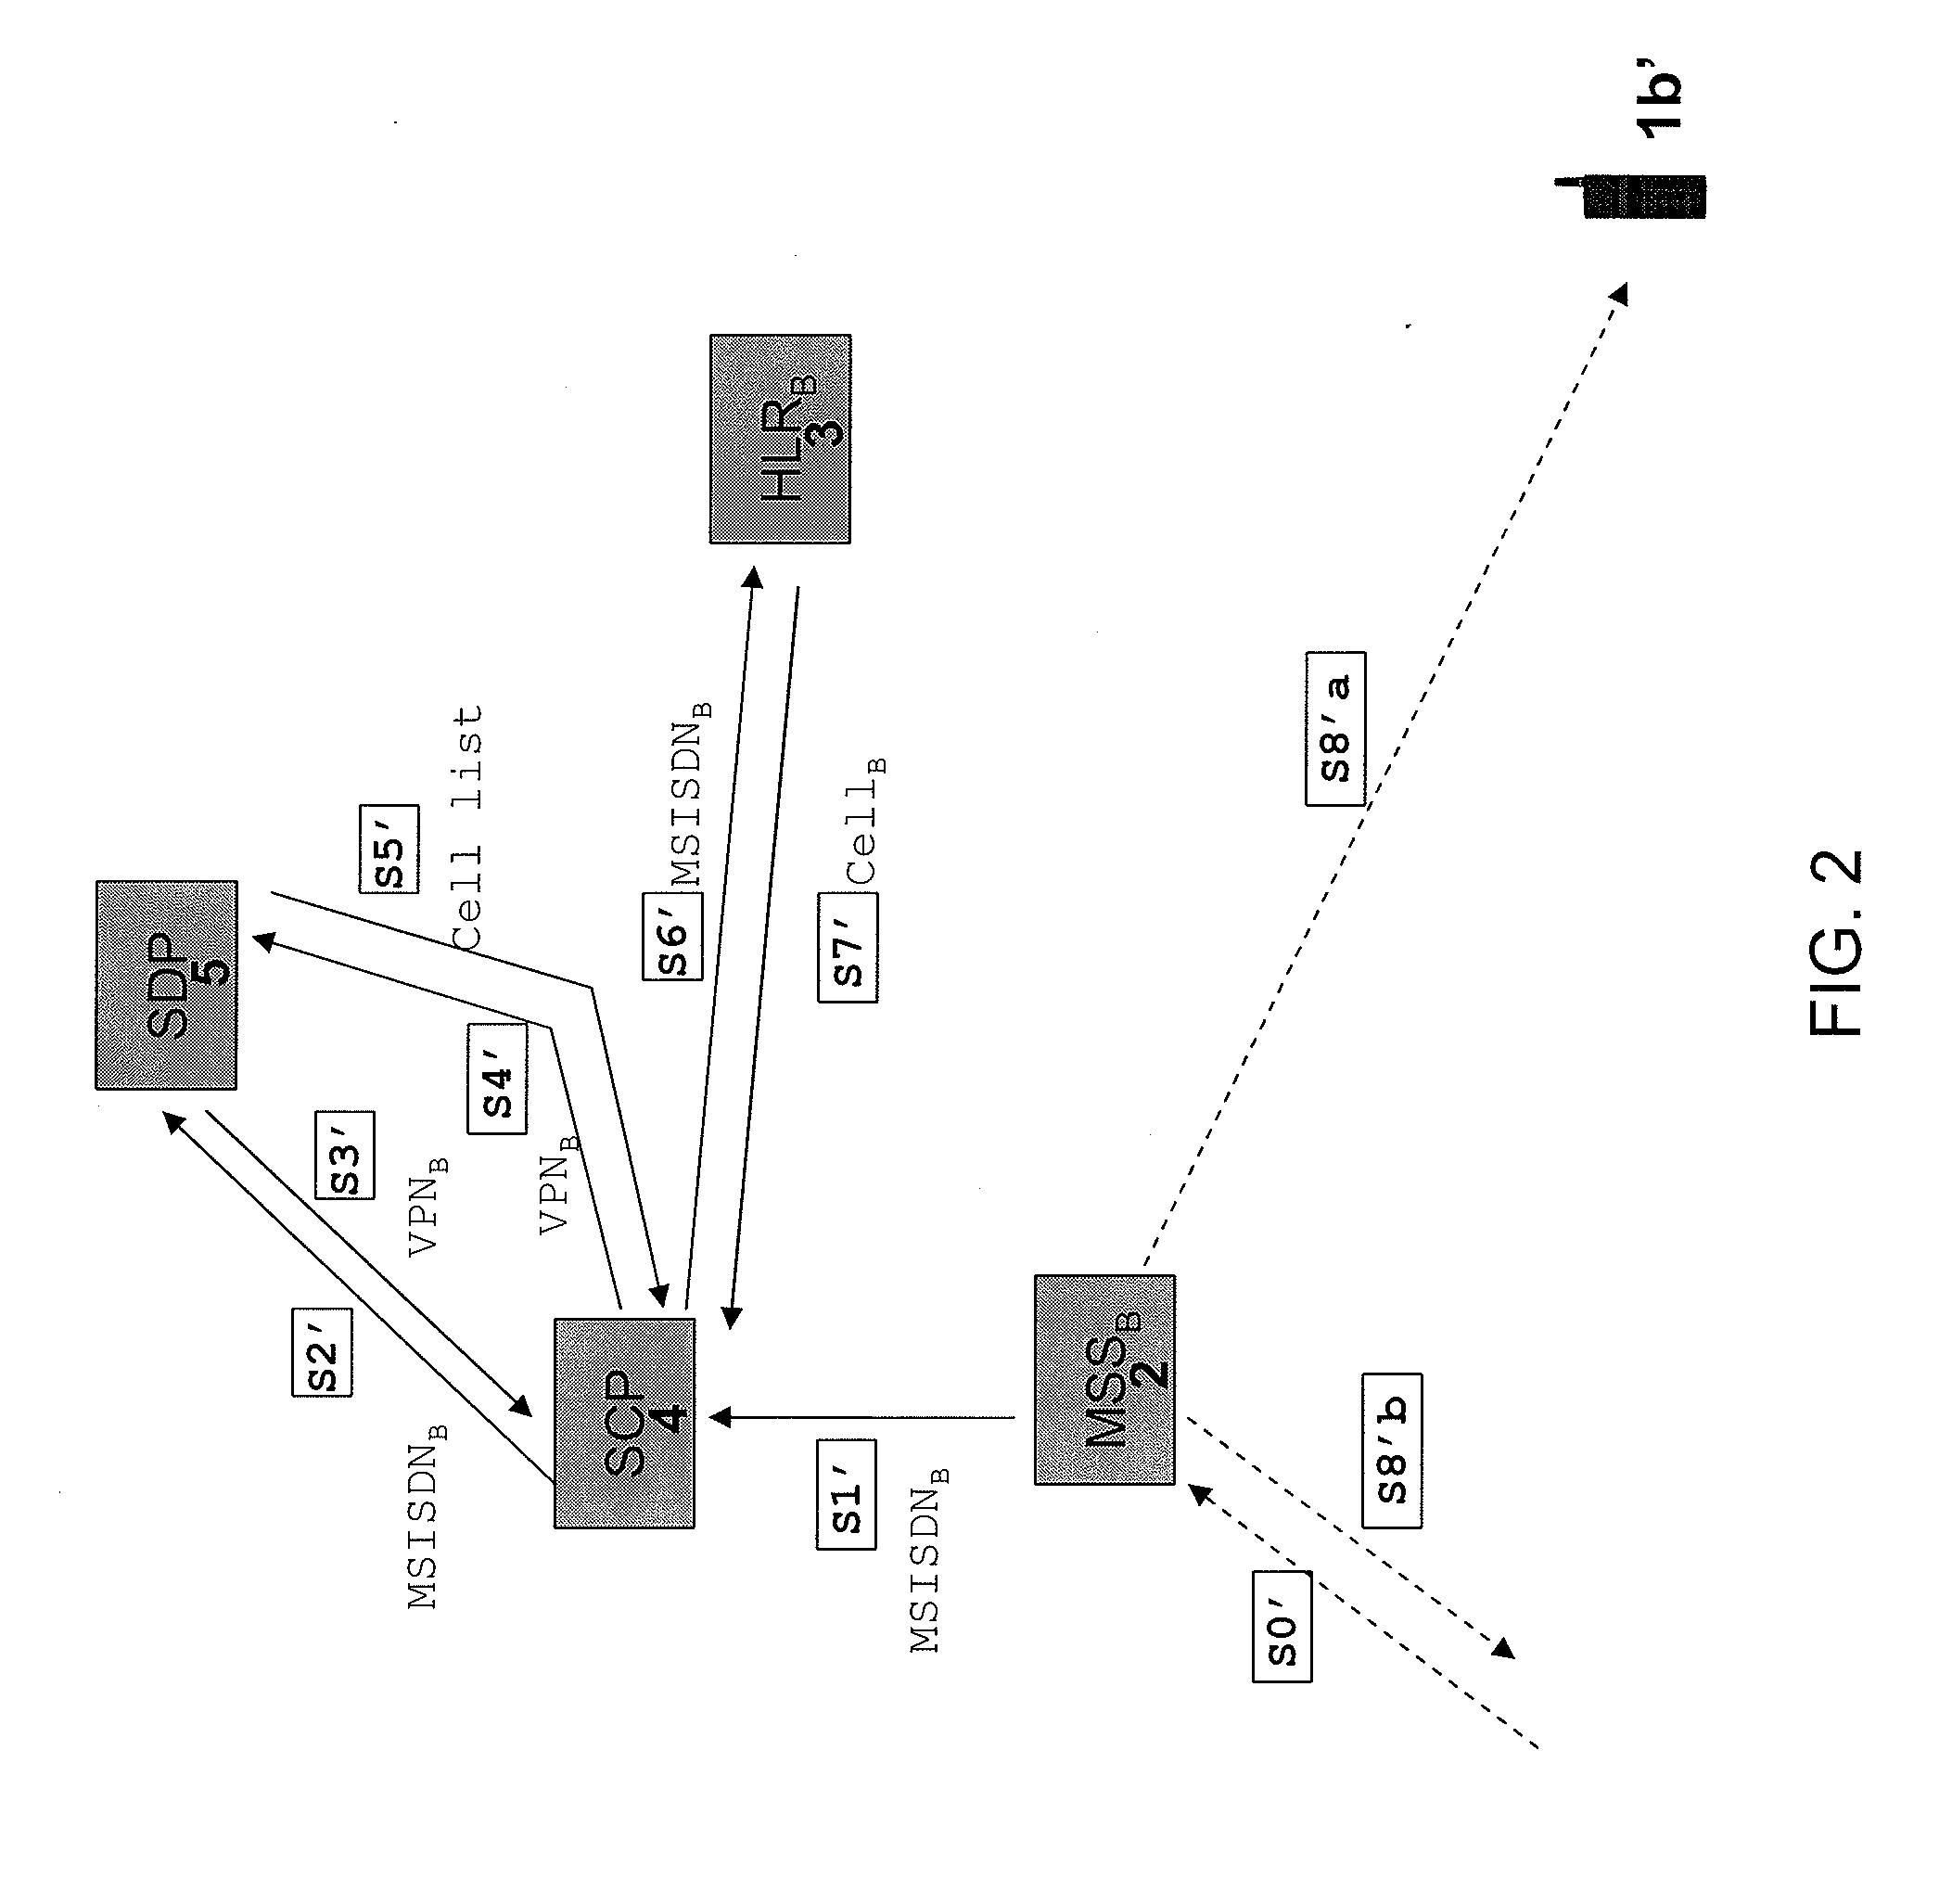 System and Method for Providing Mobile Based Services for Hotel PBX